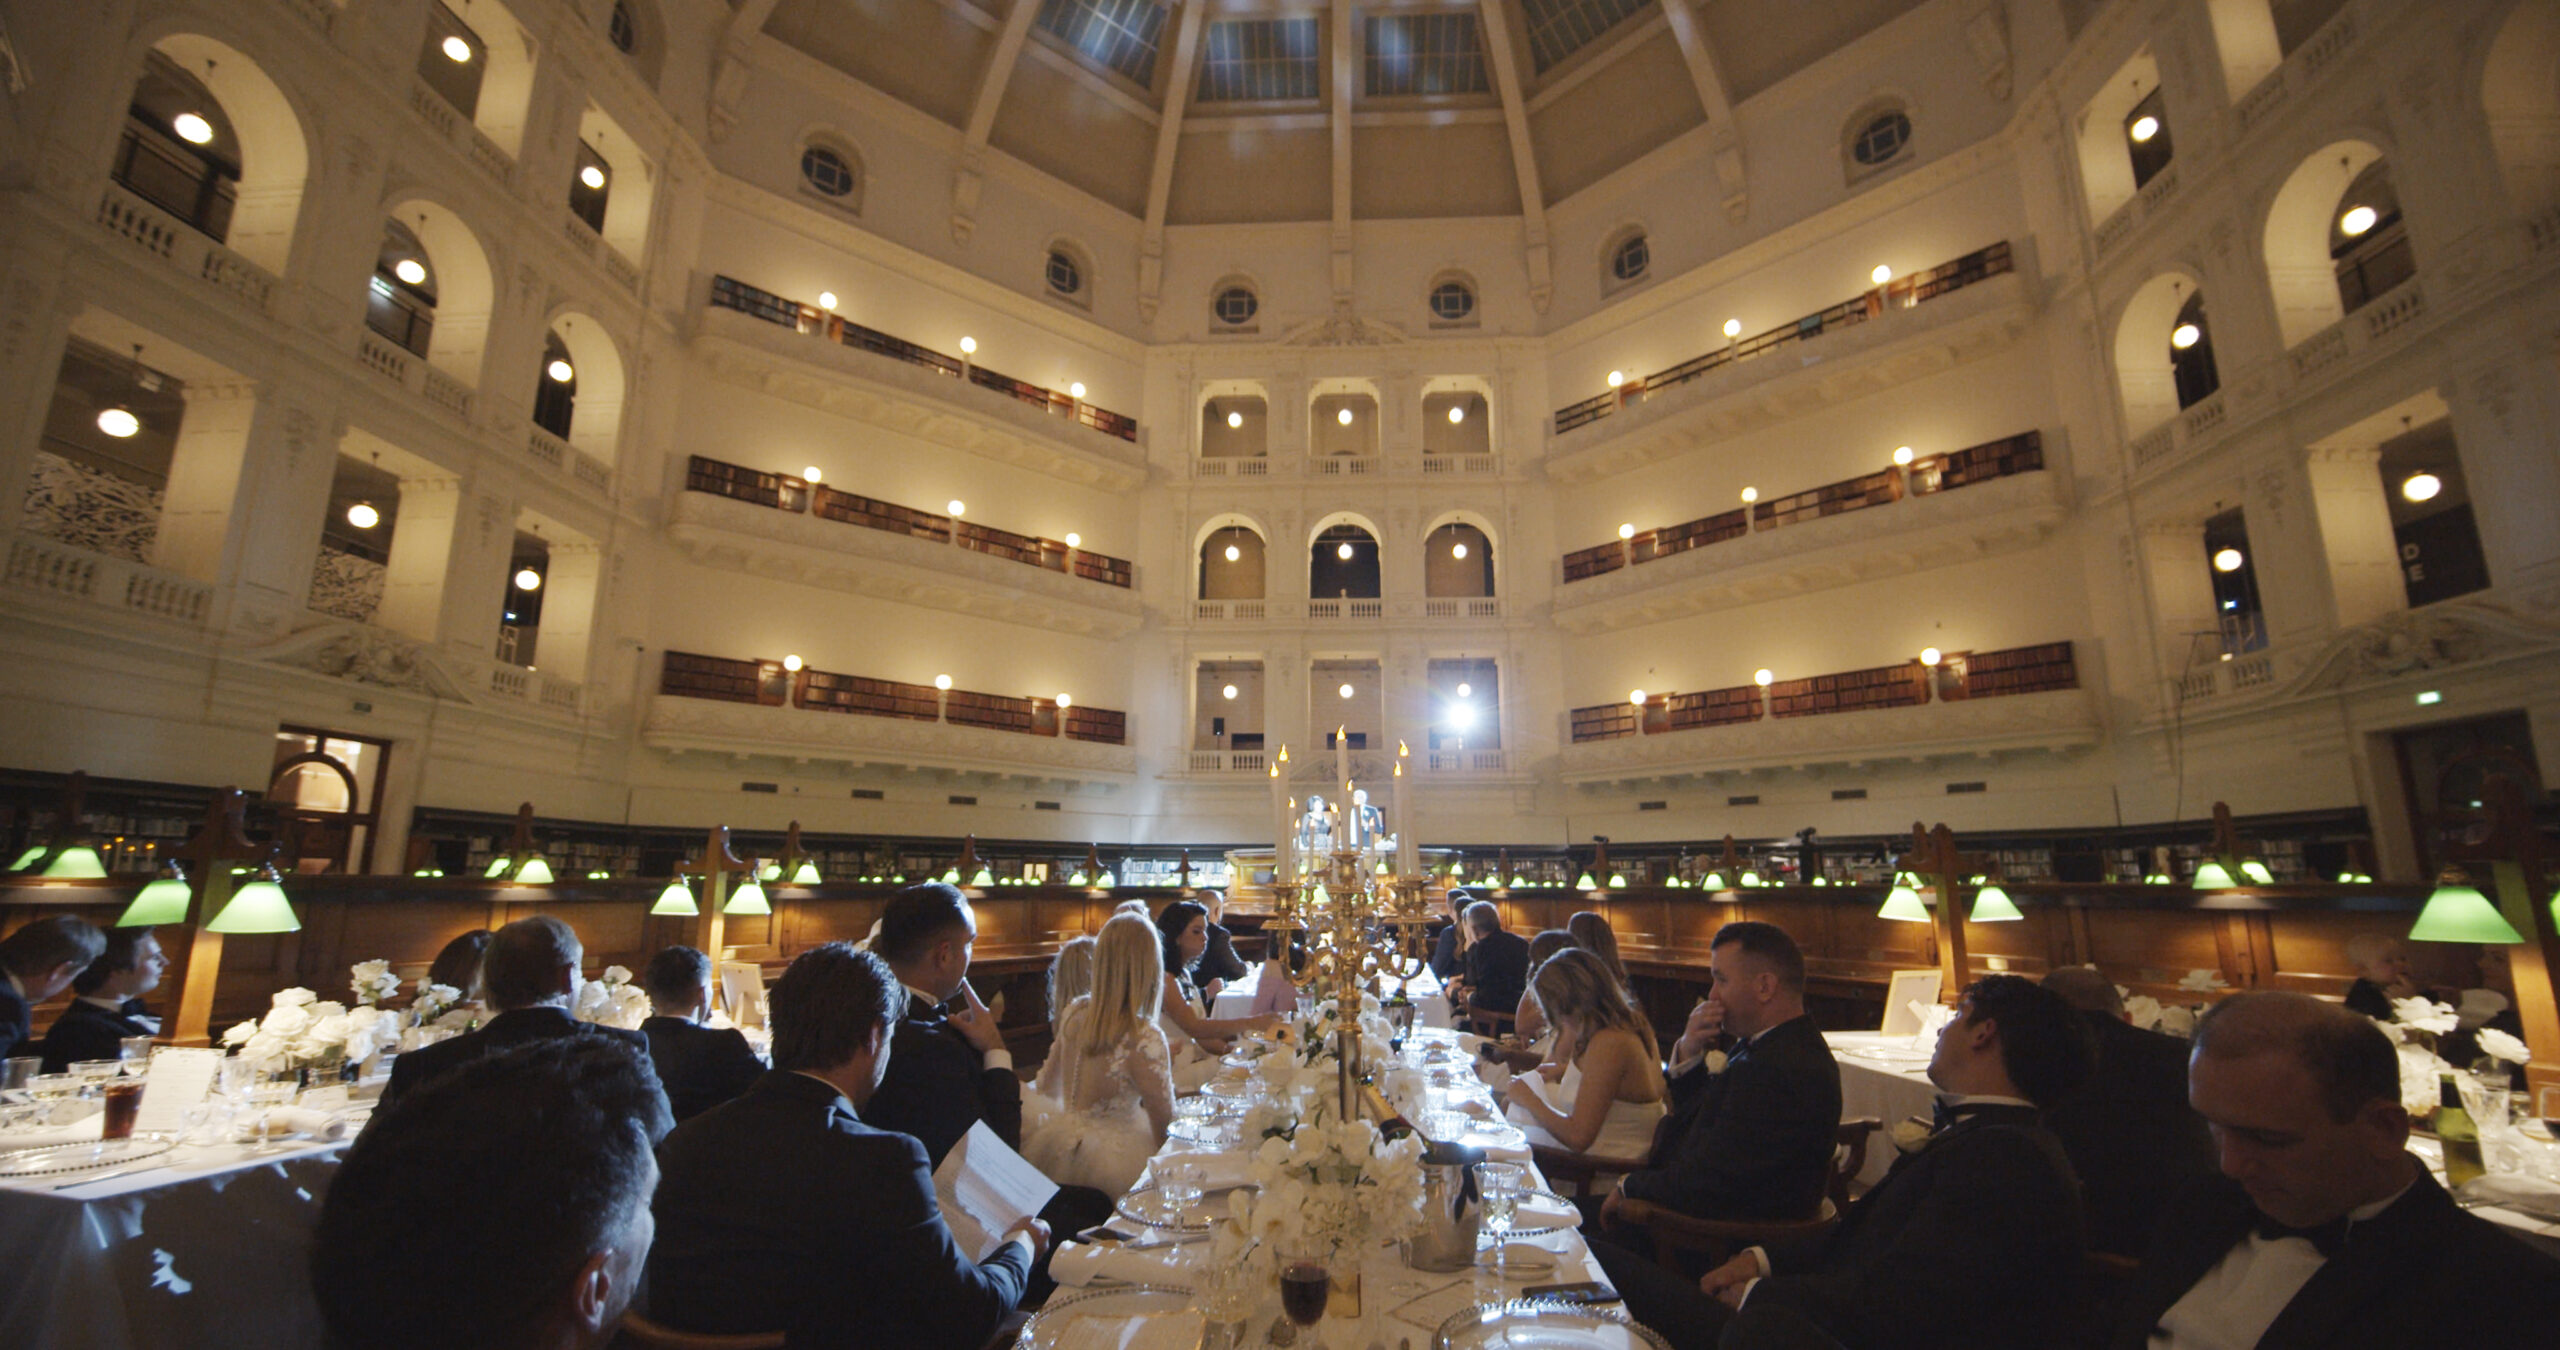 State Library of Victoria Corporate Events Parties and Weddings